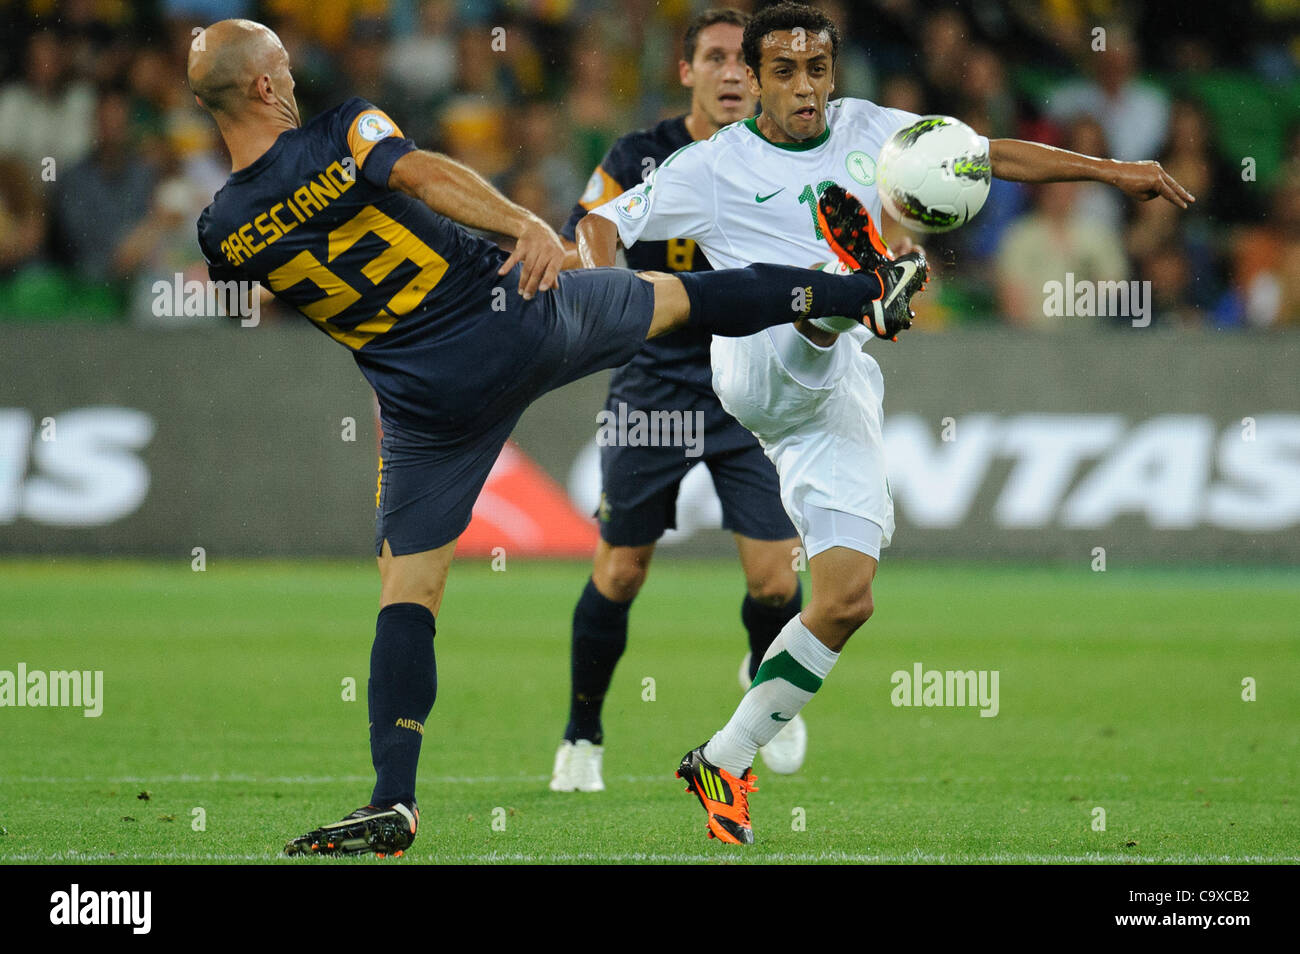 Feb. 29, 2012 - Melbourne, Victoria, Australia - Mark BRESCIANO (23) of Australia and Mohammad AL SHALHOUB (10) of Saudi Arabia fight for the ball during the FIFA 2014 World Cup Group D Asian Qualifier match between Australia and Saudi Arabia at AAMI Park in Melbourne, Australia. (Credit Image: © Sy Stock Photo